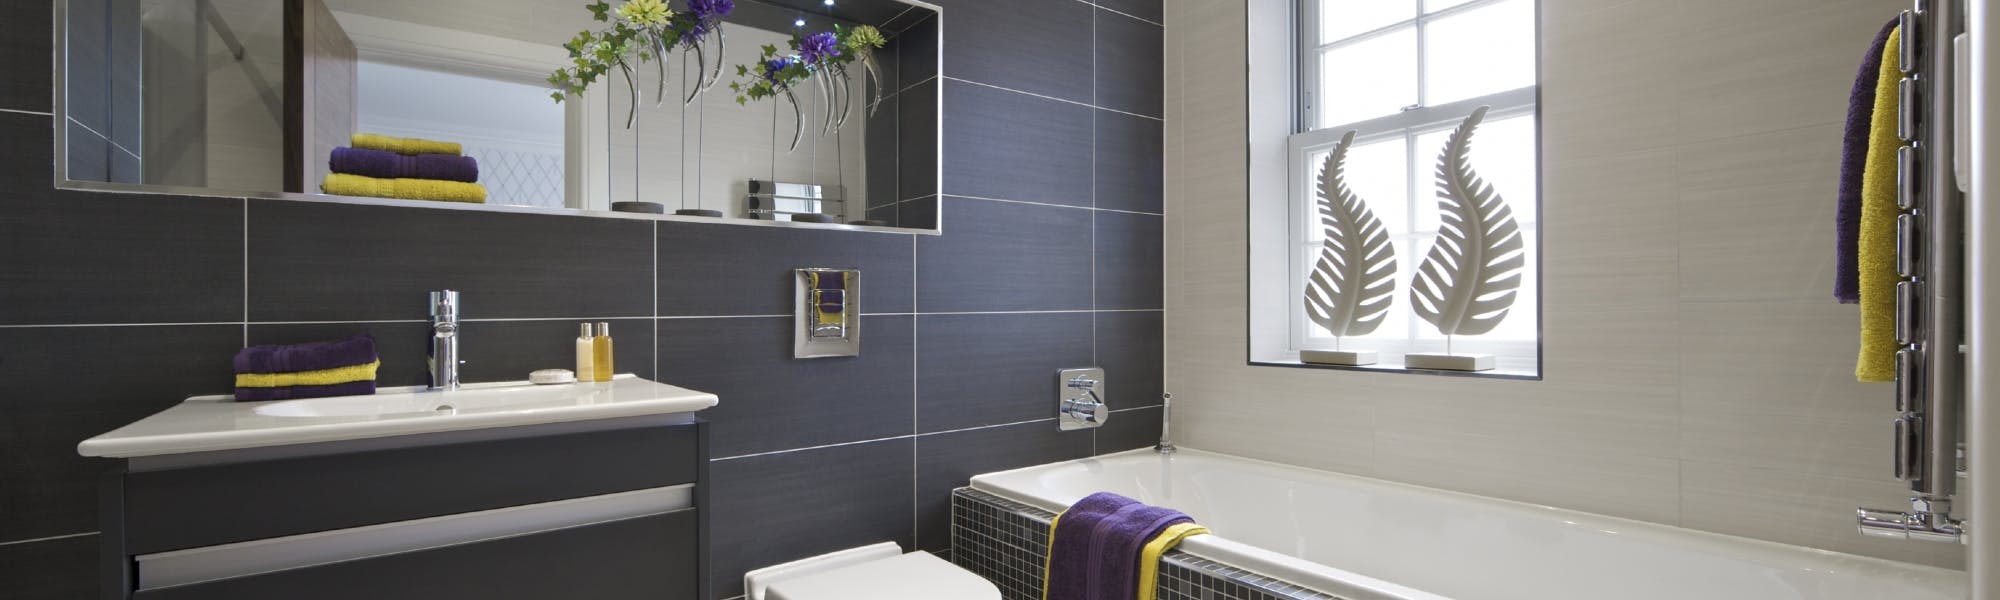 small bathrooms - designed, supplied & installed